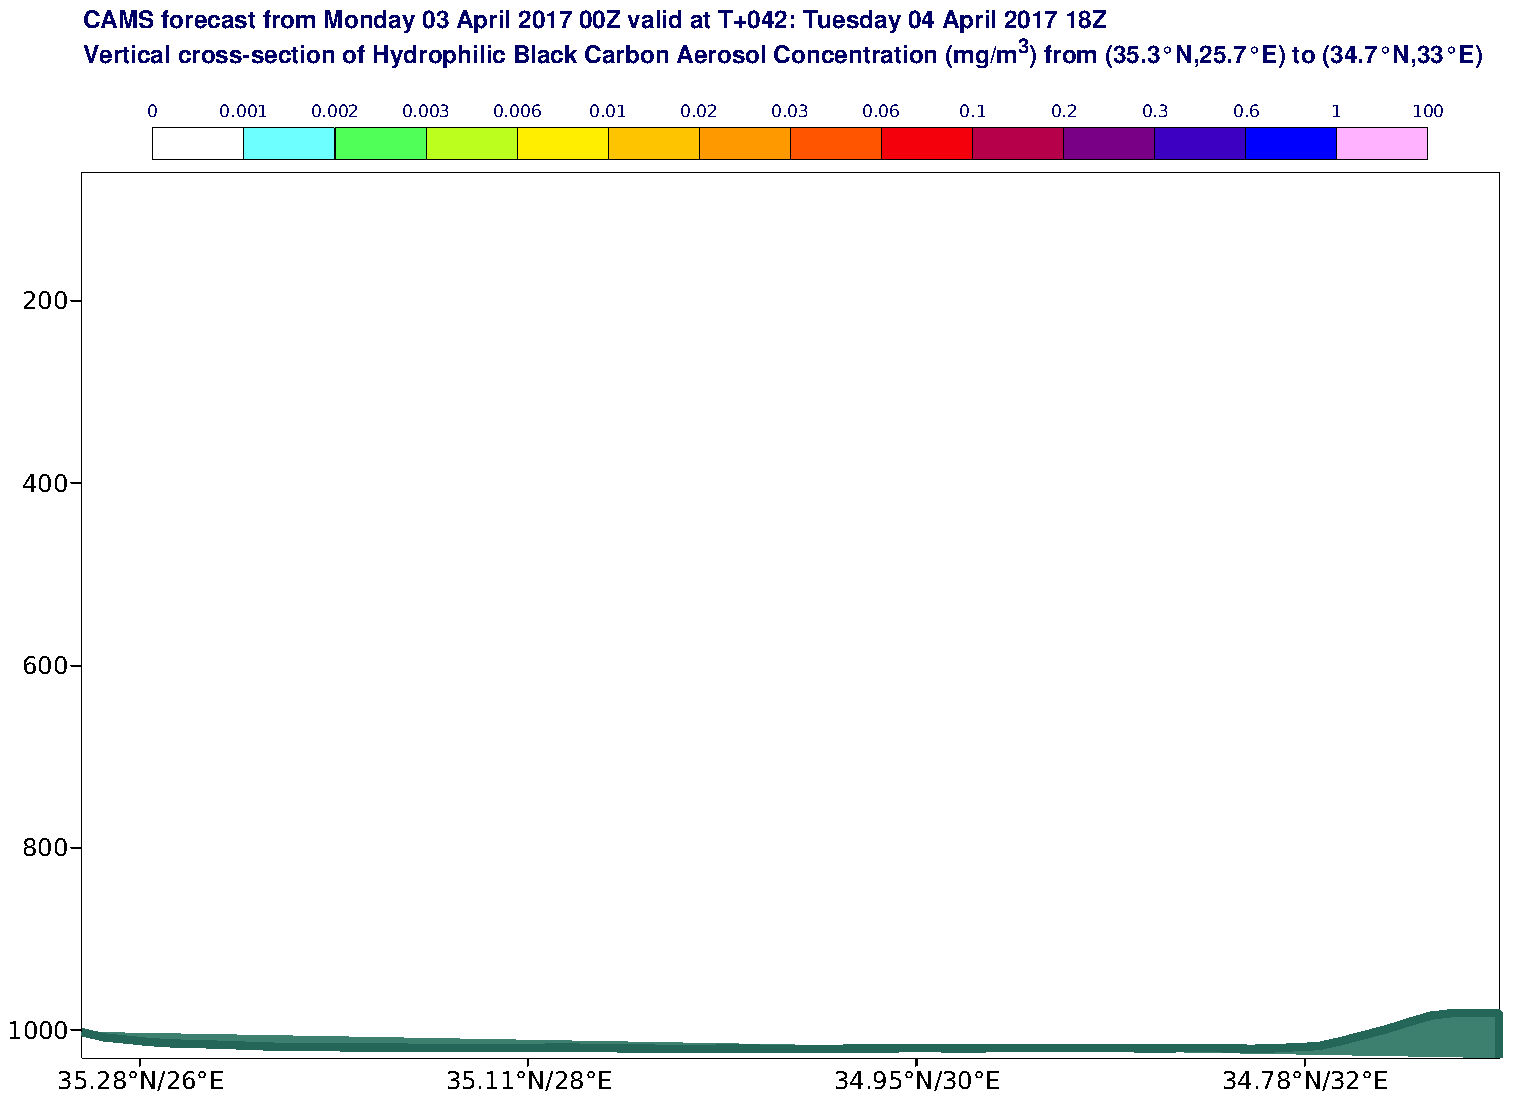 Vertical cross-section of Hydrophilic Black Carbon Aerosol Concentration (mg/m3) valid at T42 - 2017-04-04 18:00